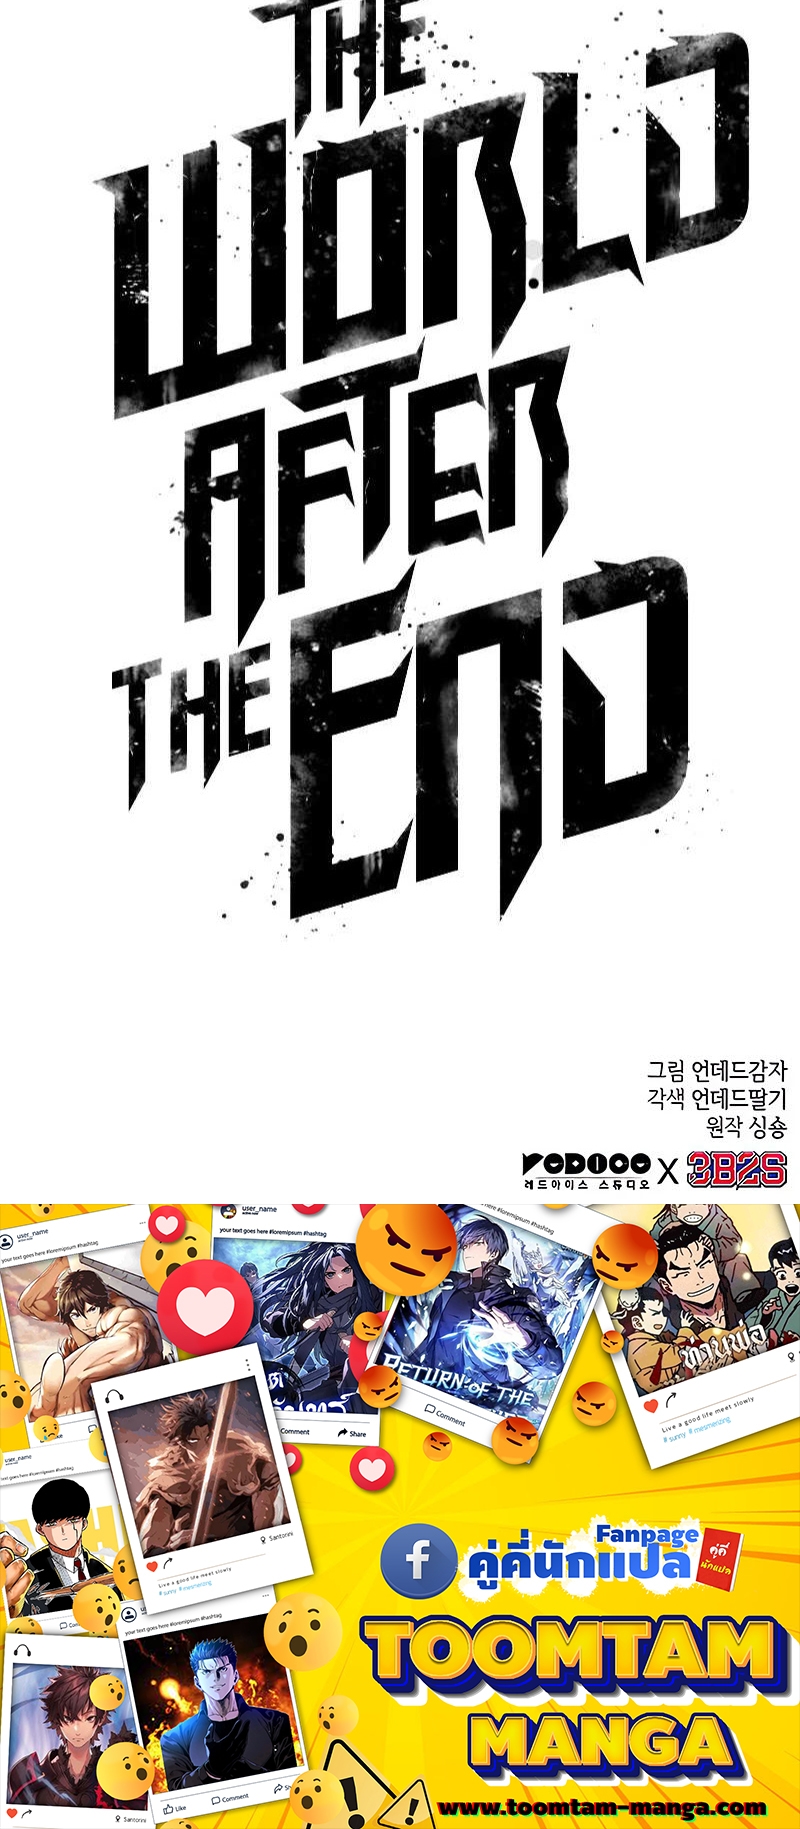 The world after the End 122 13 04 25670096